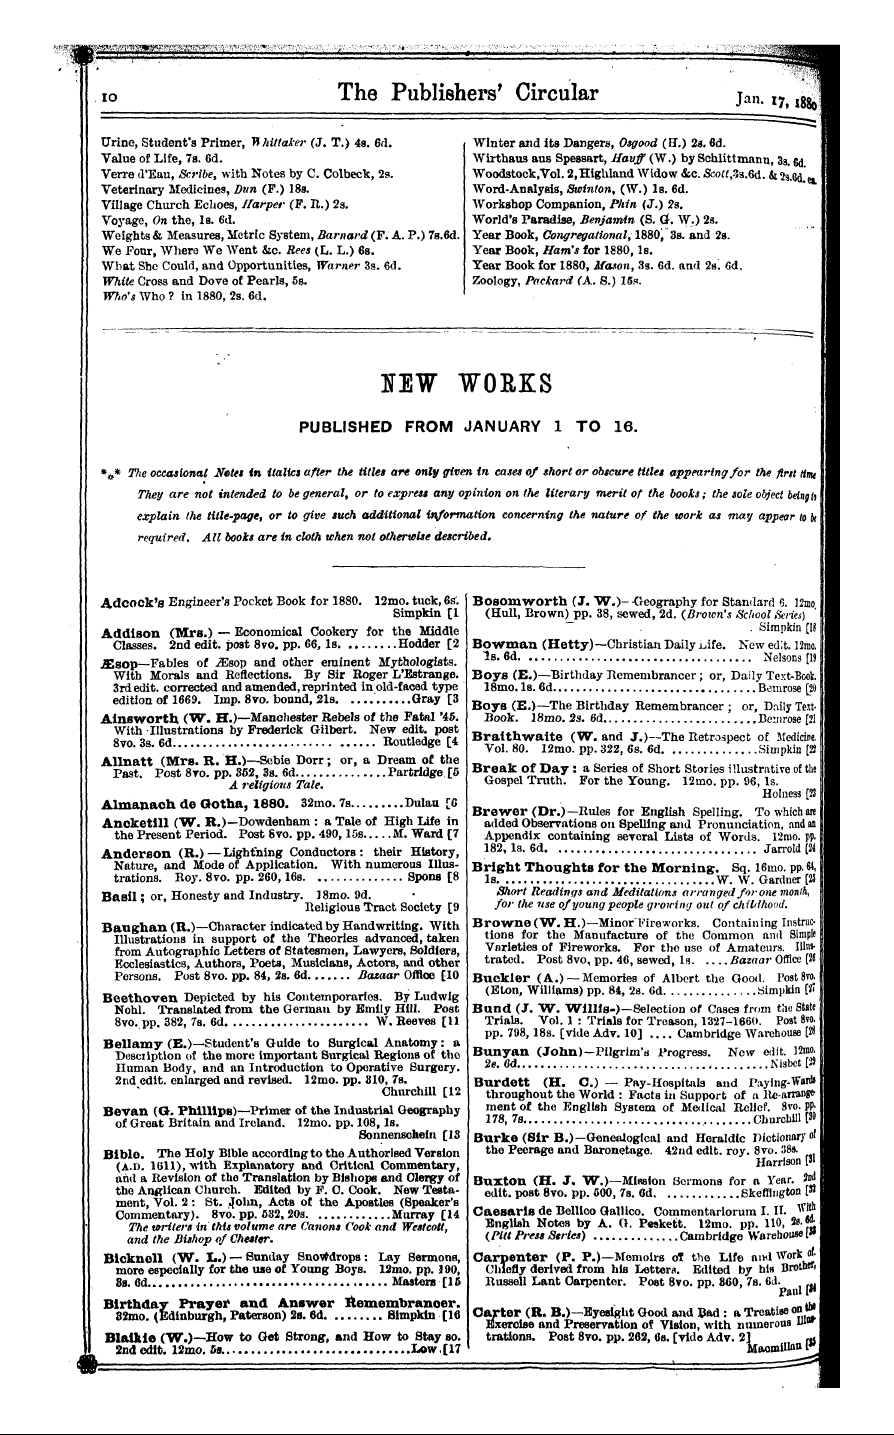 Publishers’ Circular (1880-1890): jS F Y, 1st edition - Jew Woeks I Published From January 1 To 16. I ^H